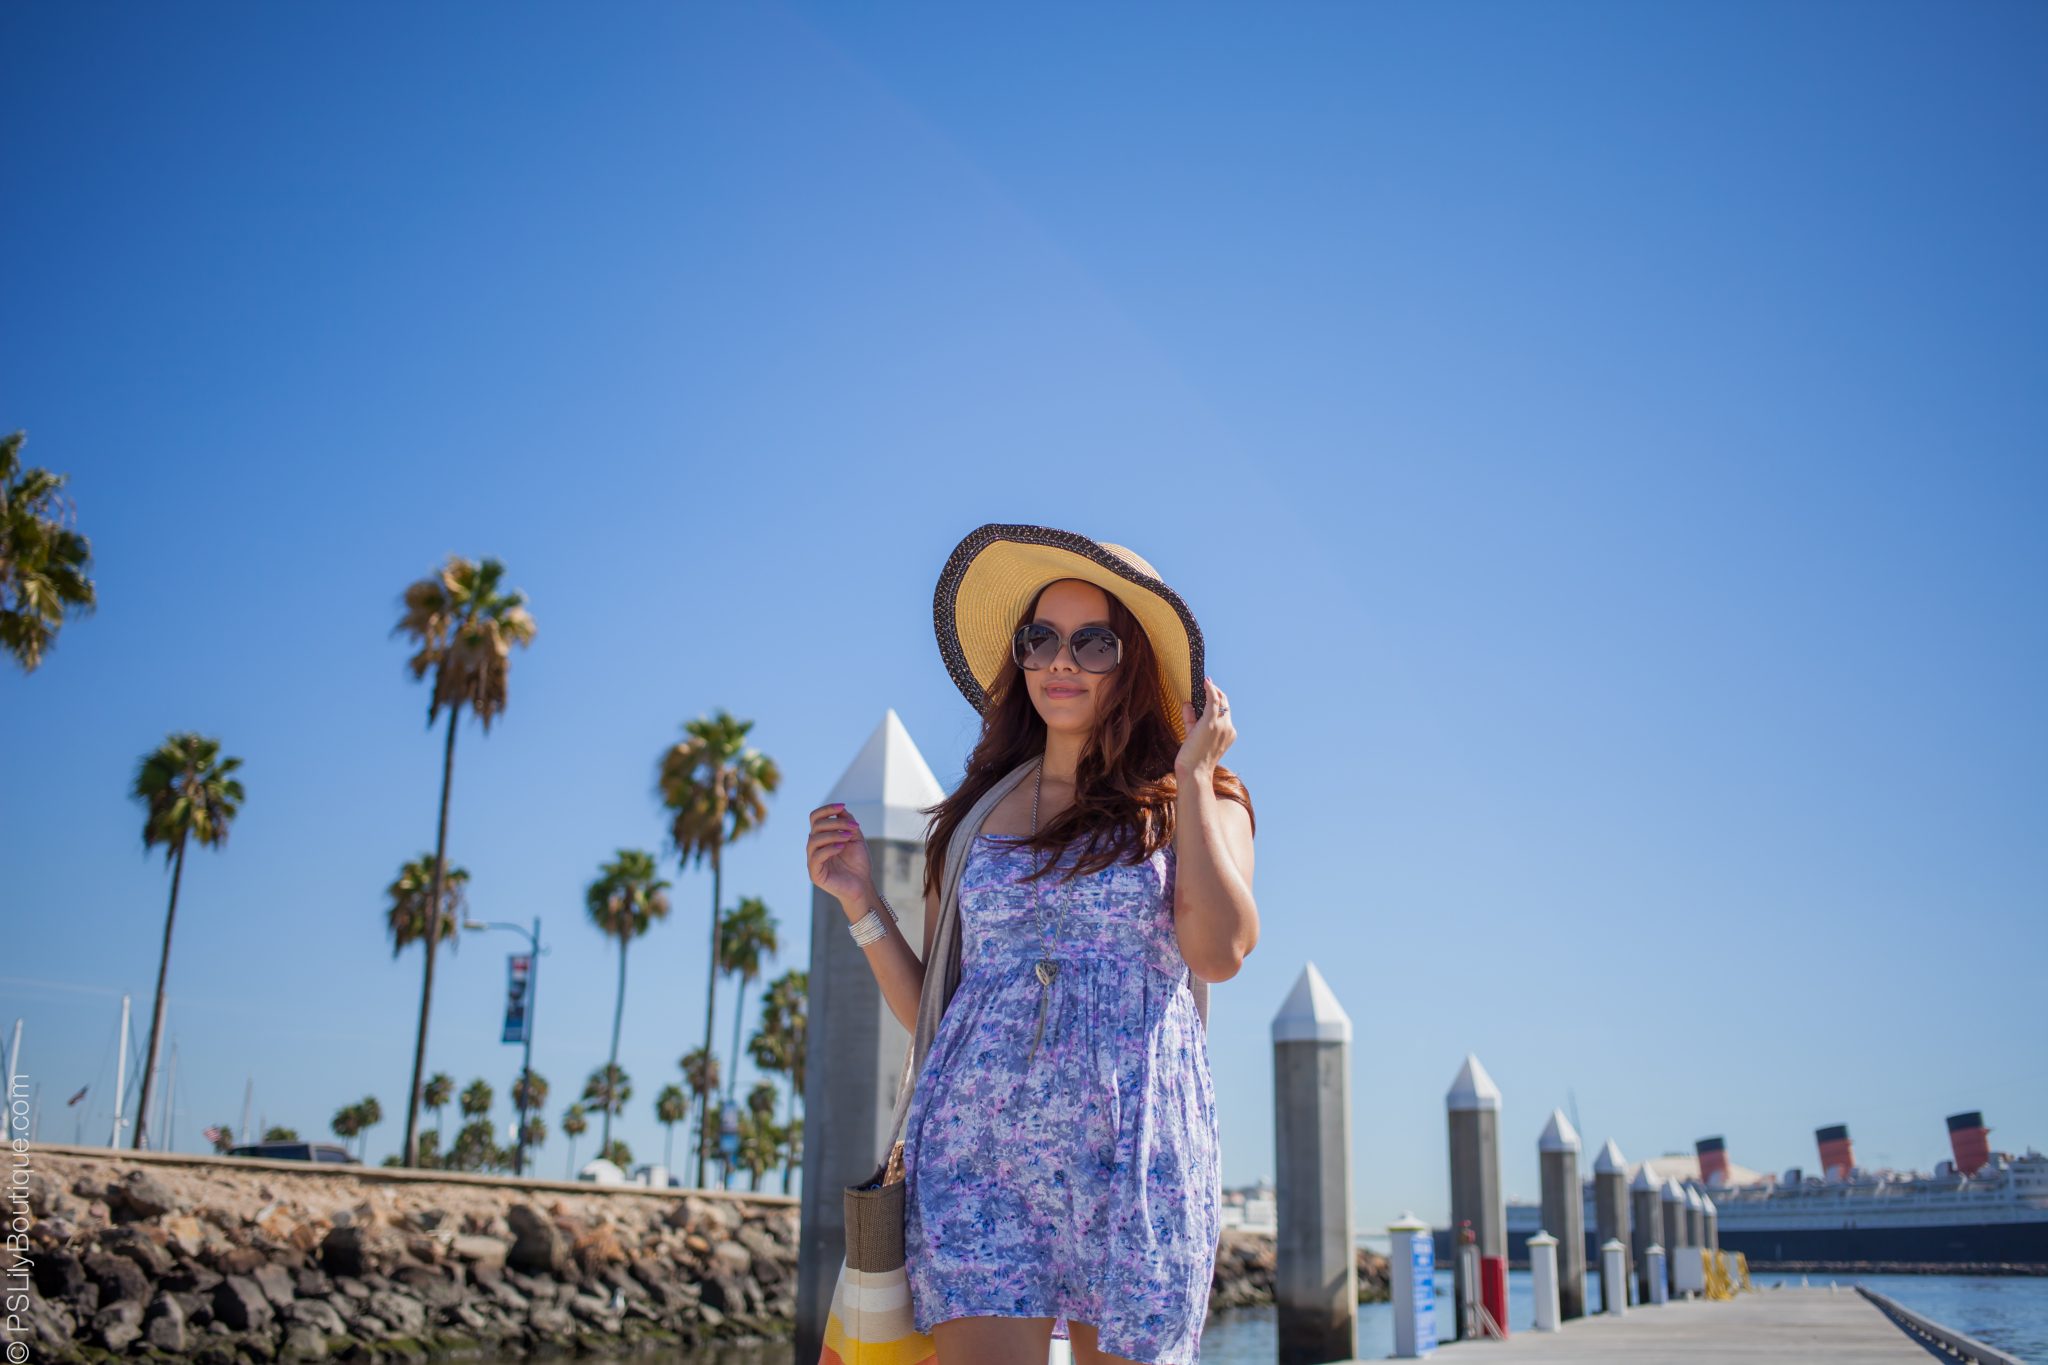 instagram-pslilyboutique-los-angeles-fashion-blogger-palm-trees-vintage-sunglasses-summer-fall-2015-vacation-outfit-ideas-